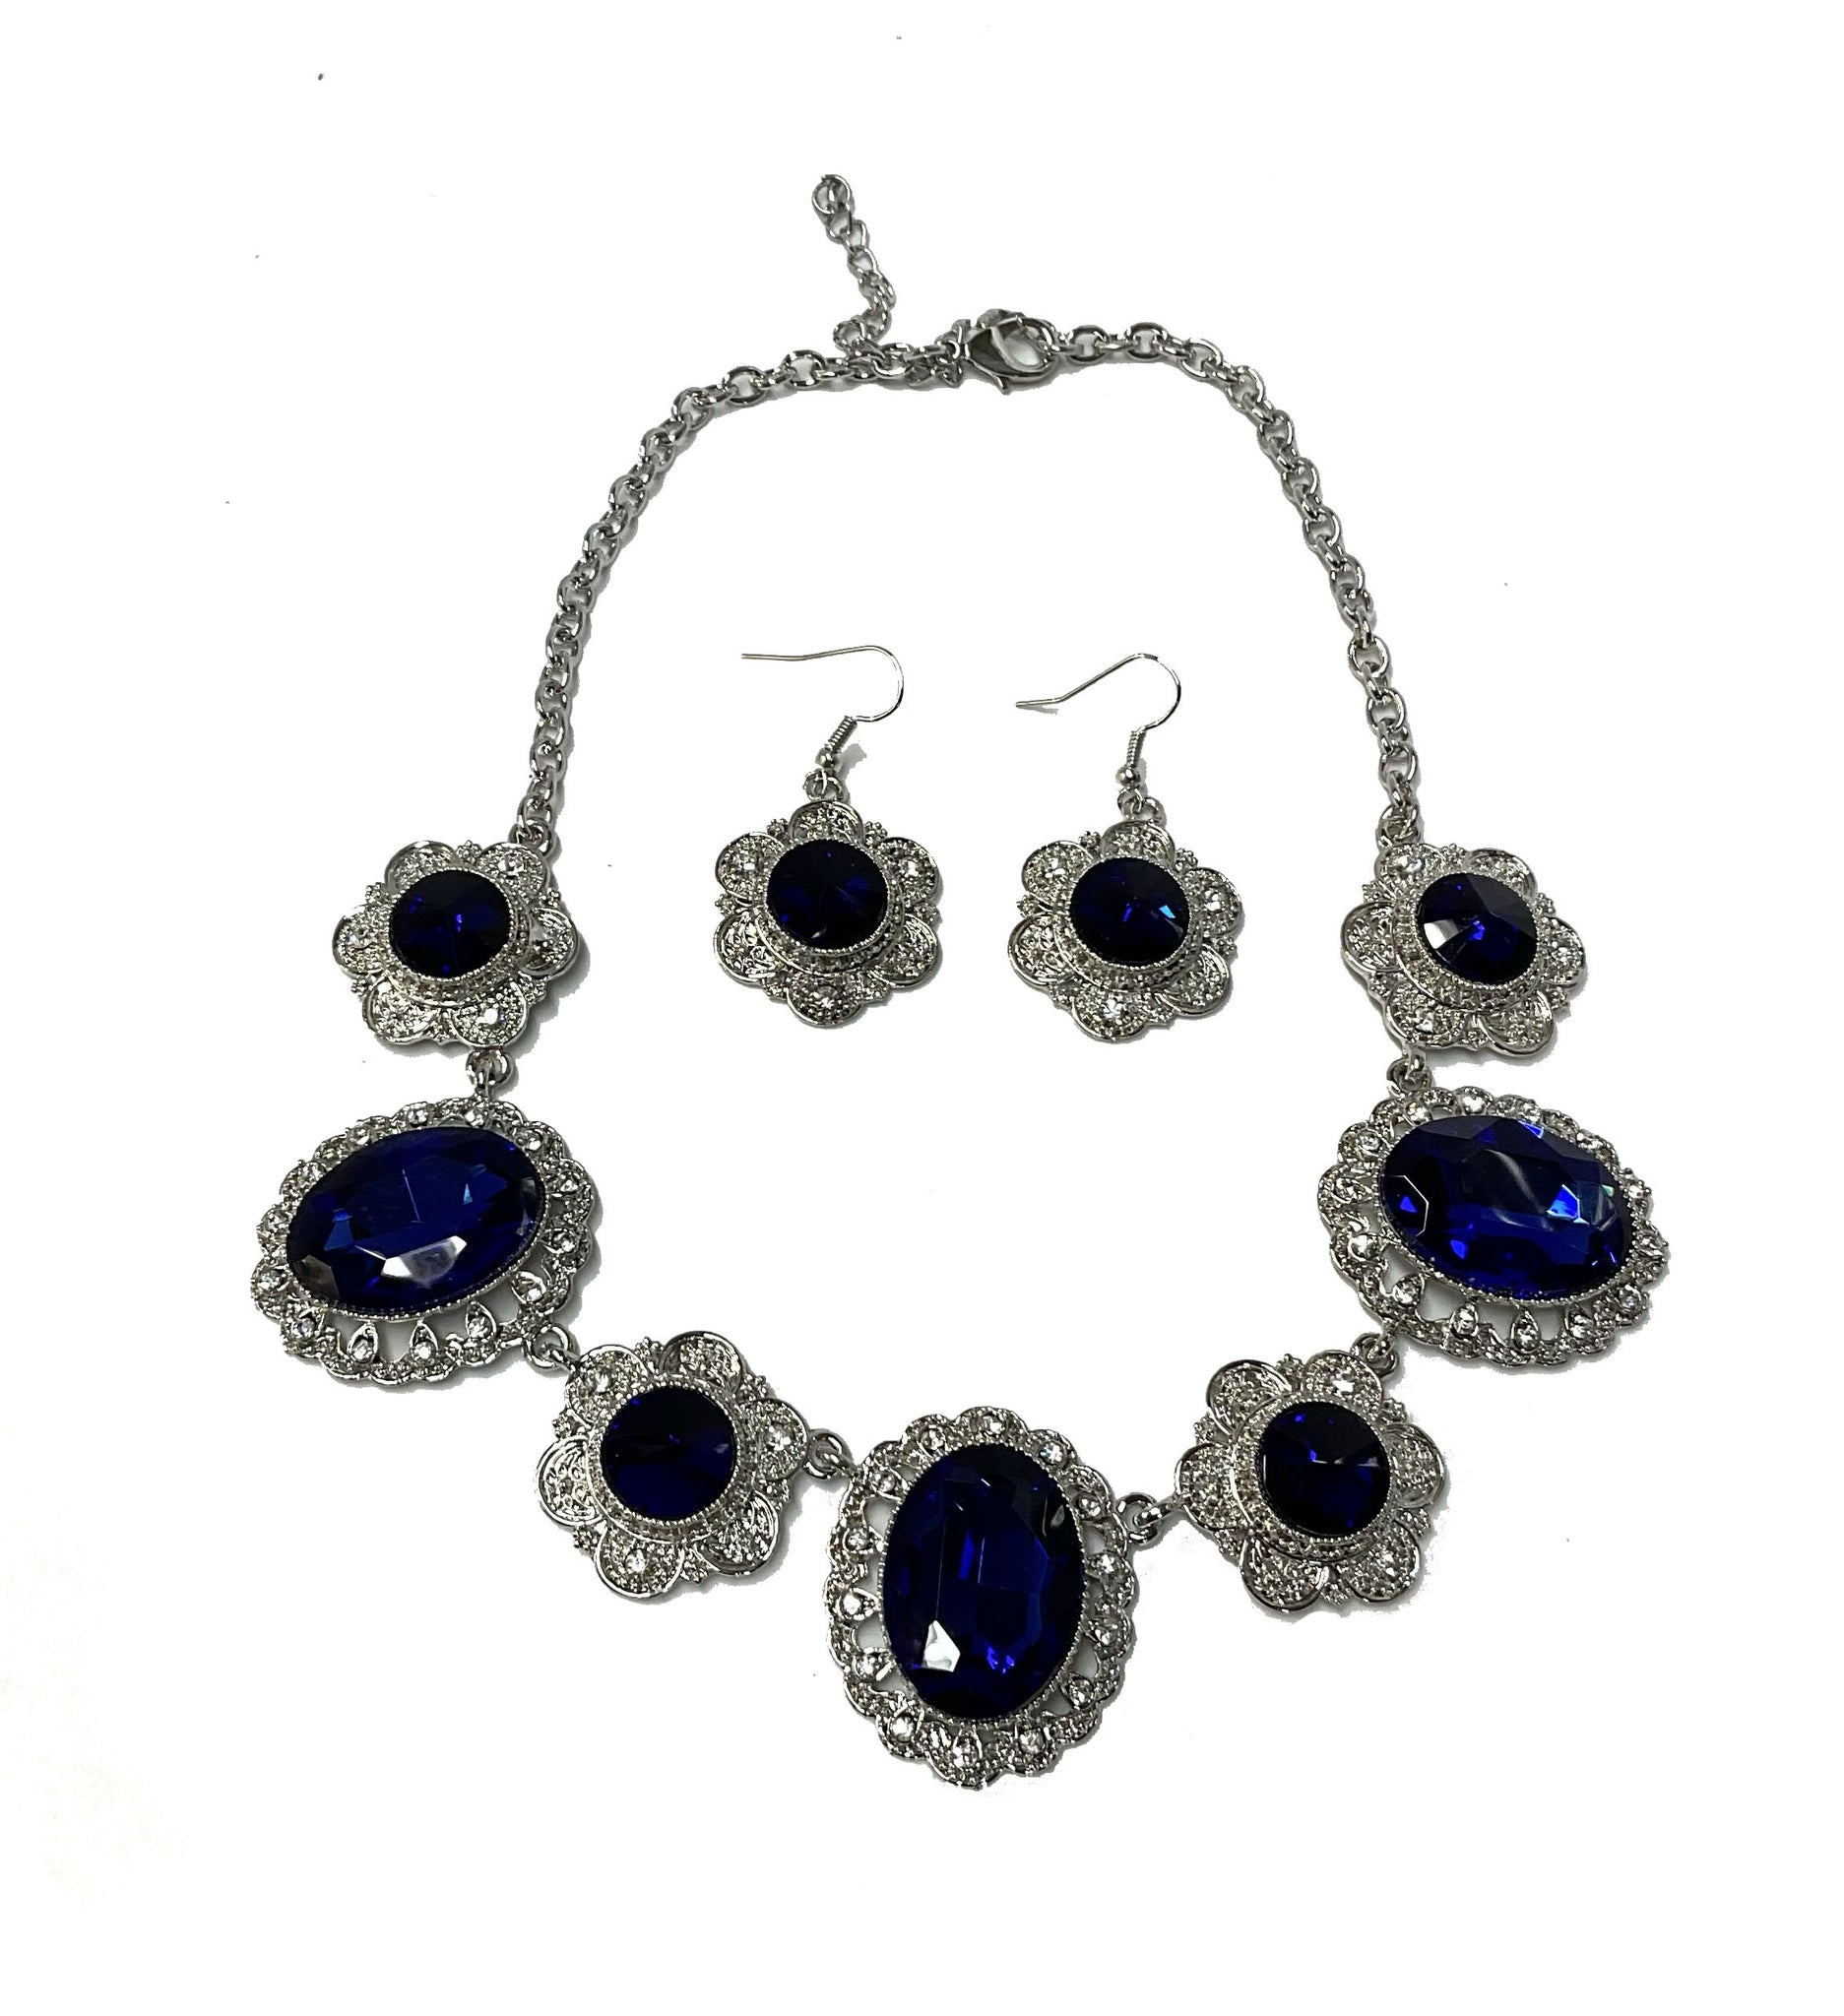 Rhinestone Necklace and Earrings Set#28-11231BL